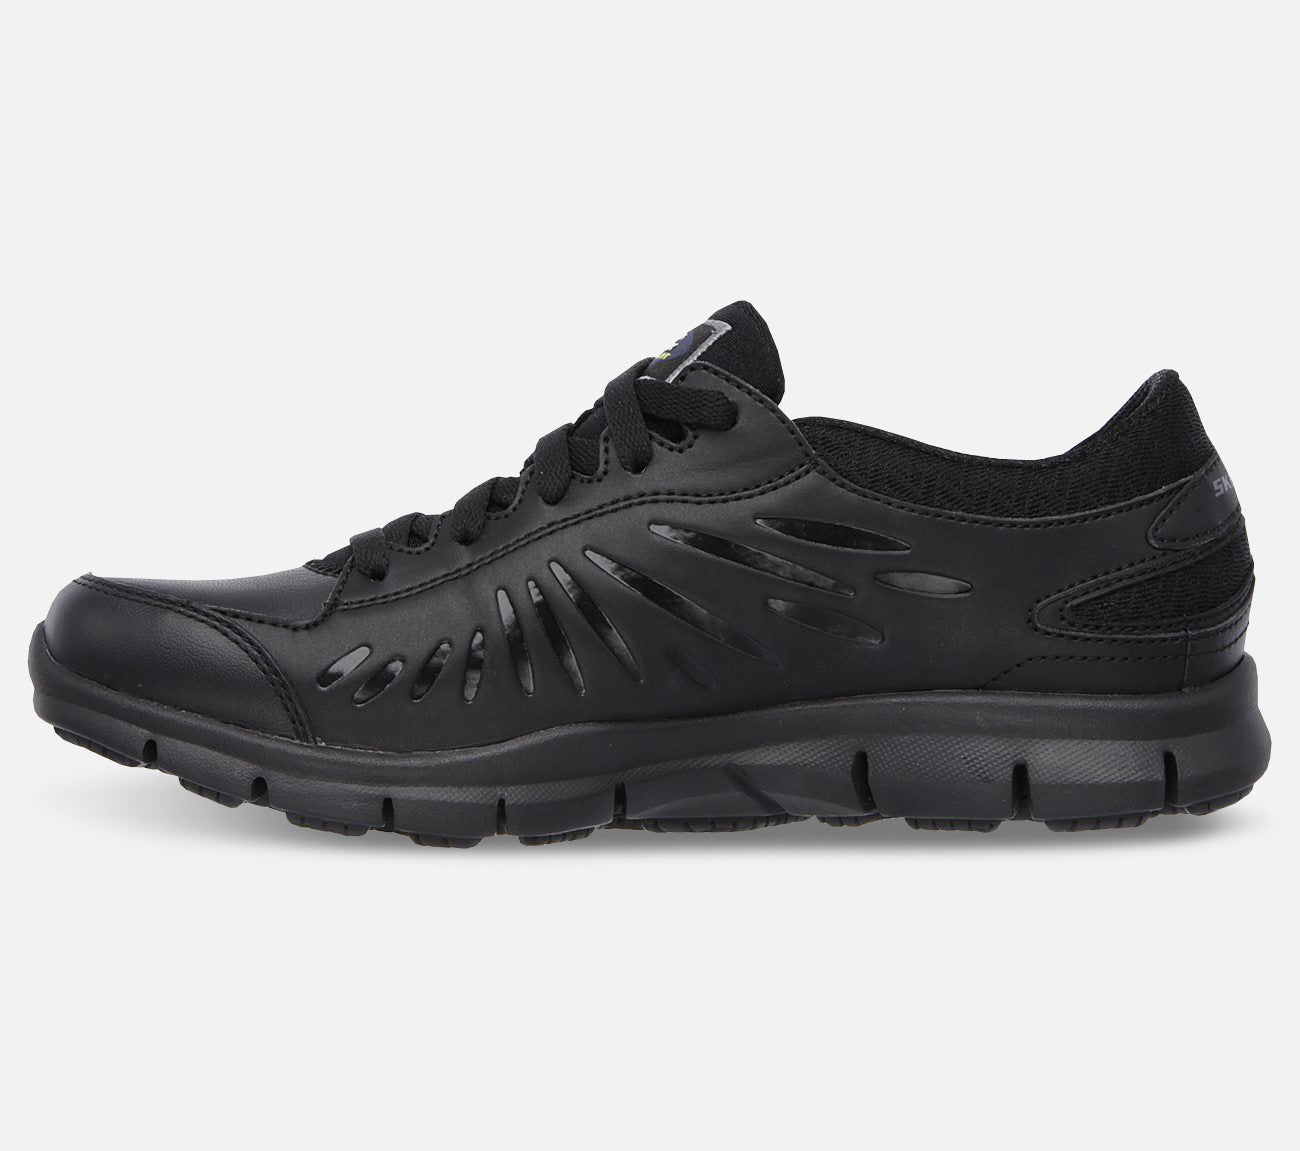 Work: Relaxed Fit - Eldred SR Work Skechers